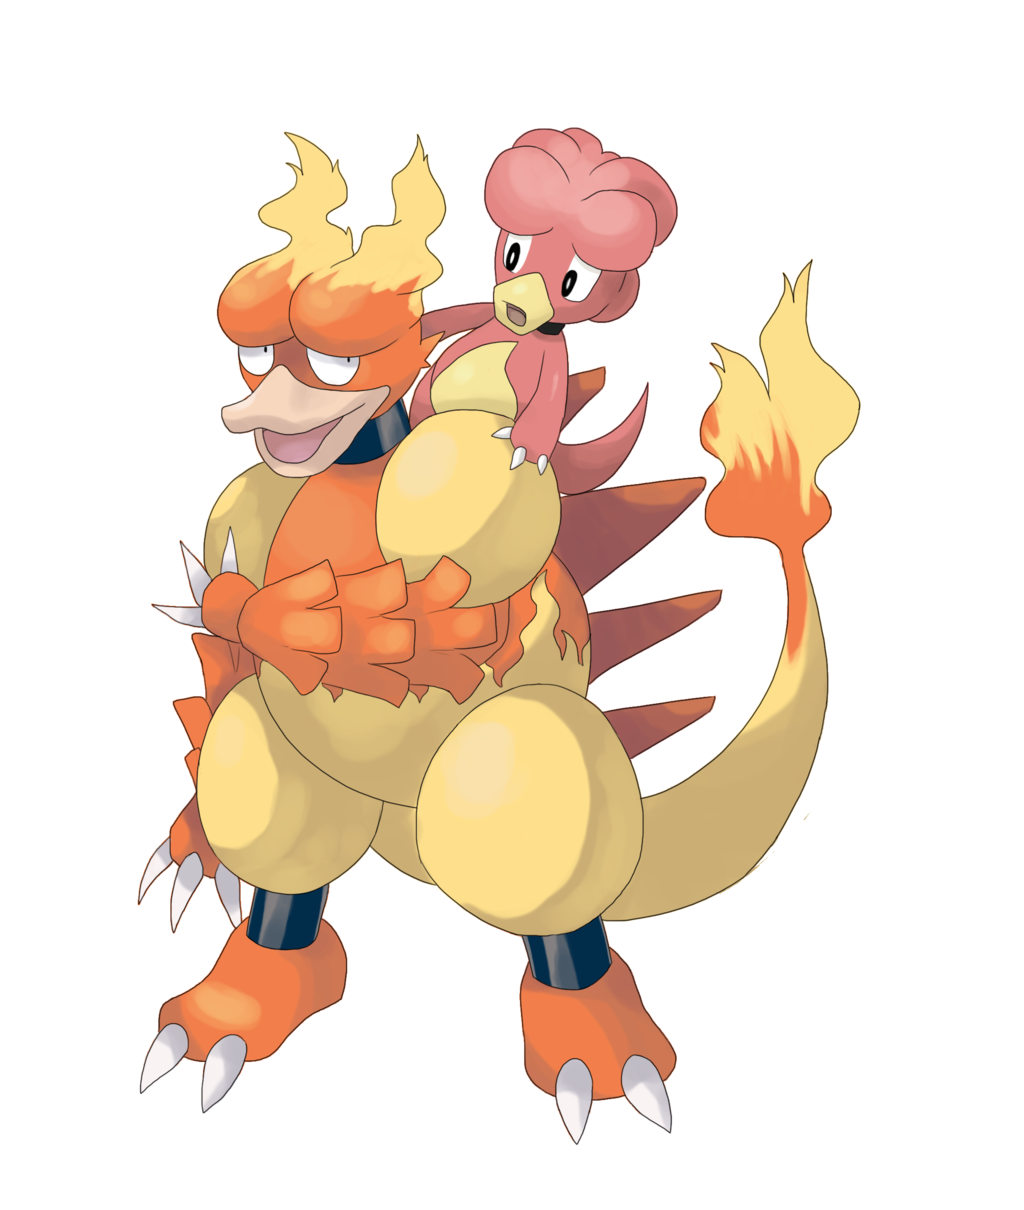 Most recent image: Magmar and Magby